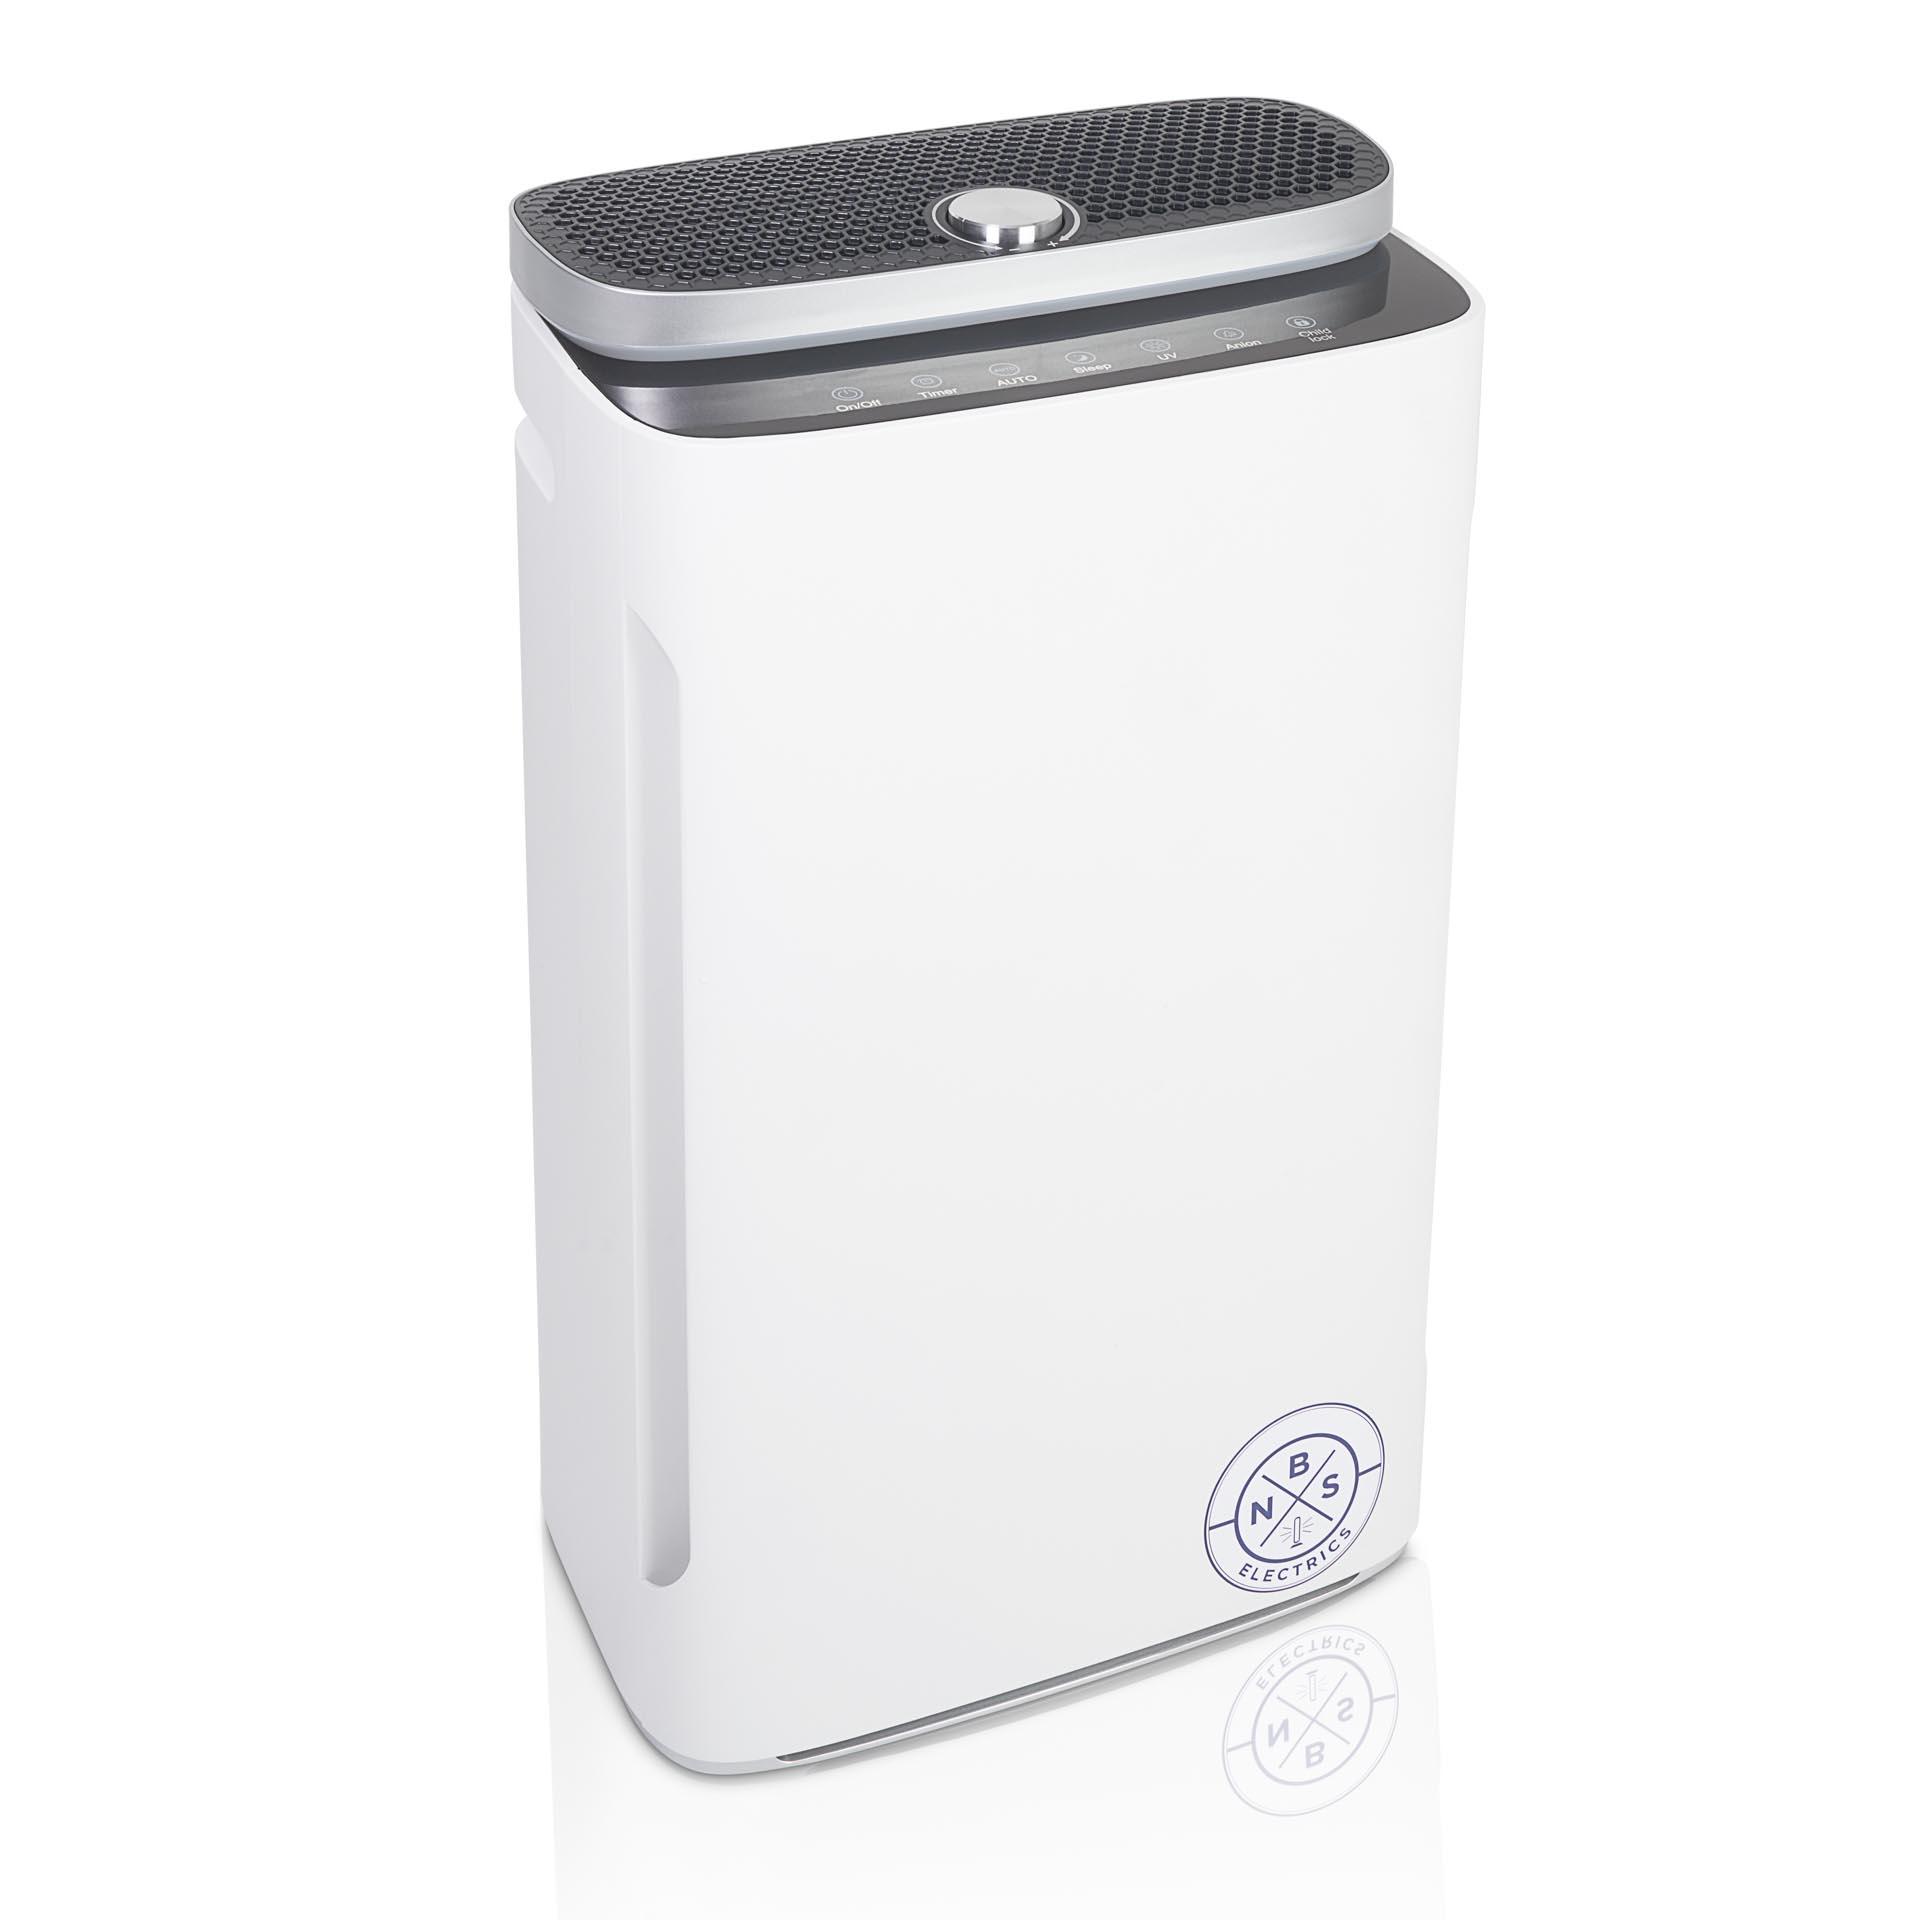 Product UVC Air Purifier - NBS Electrics image